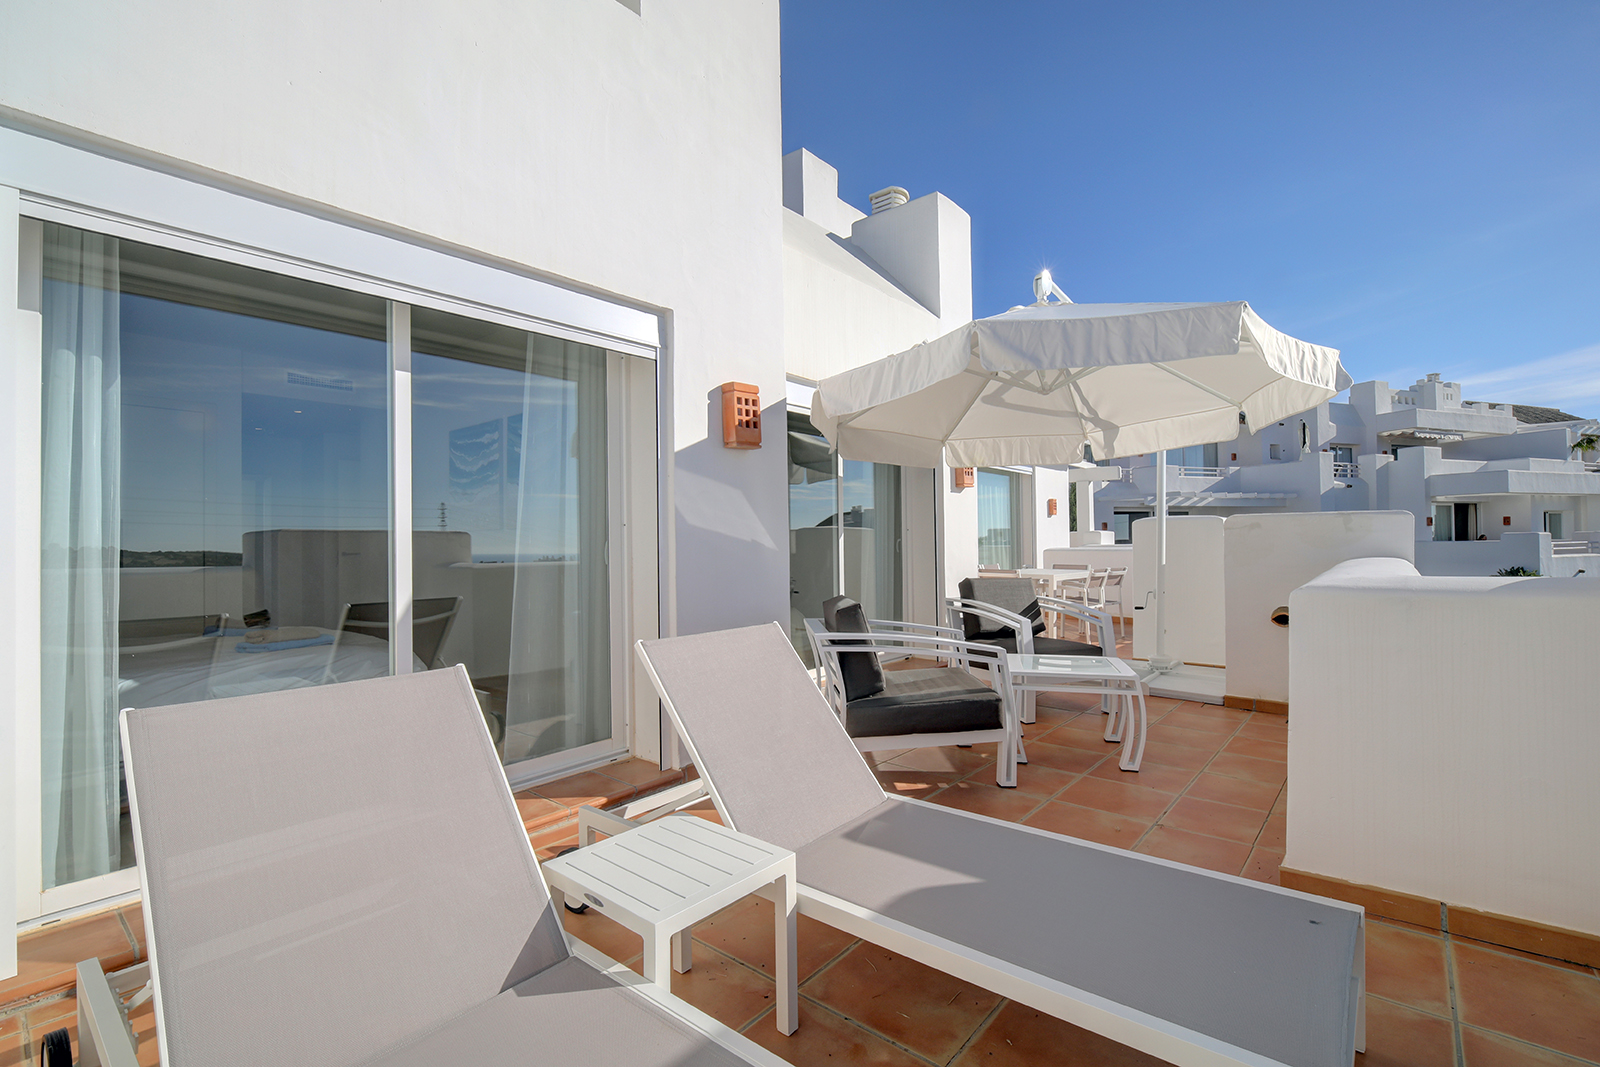 Image shows terrace with 2 sunbeds and dinnig table